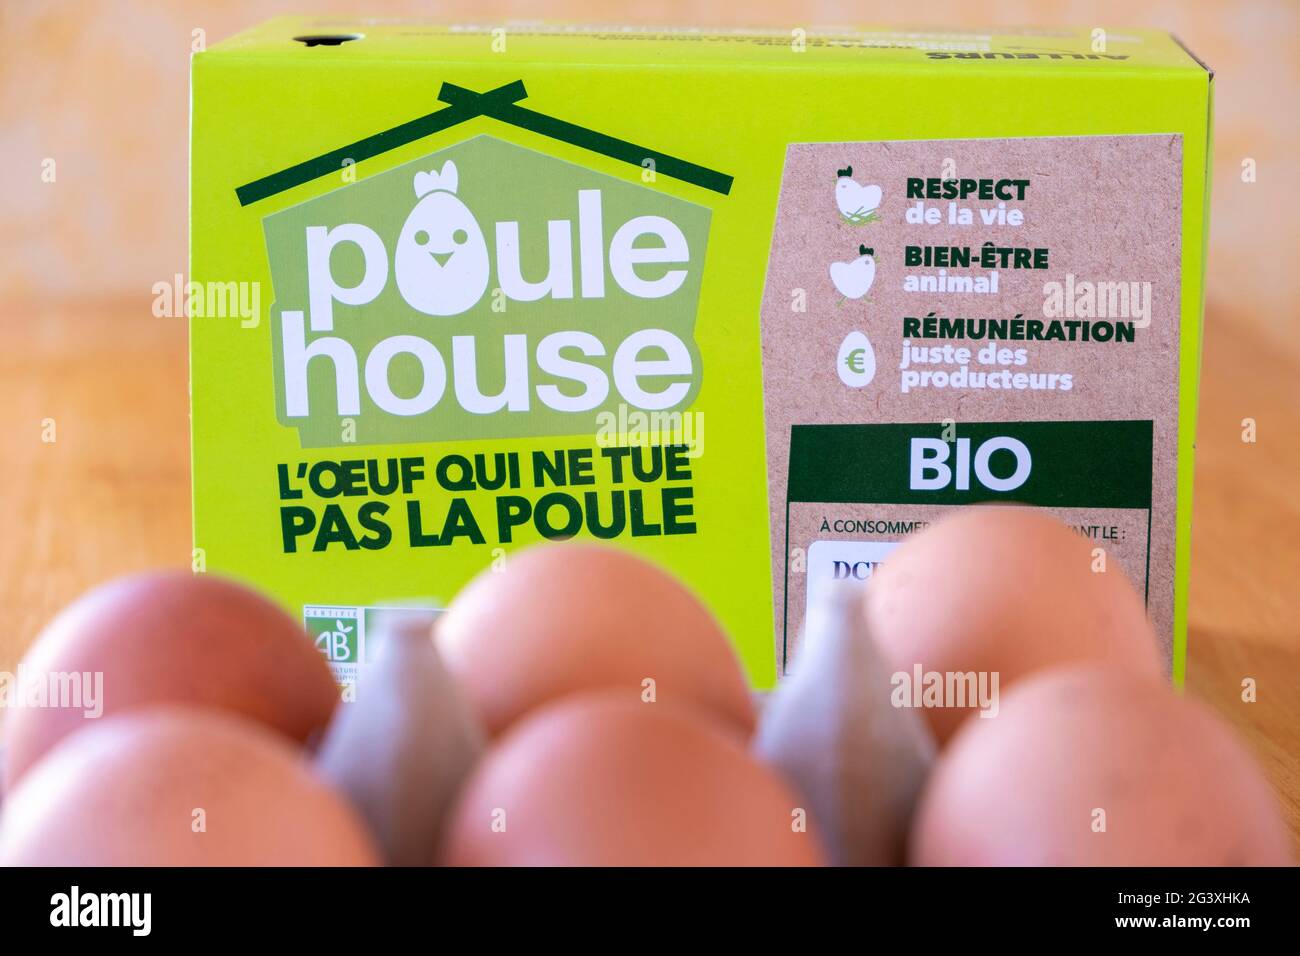 Poulehouse, the only egg brand on the market which doesn't kill chickens. The brand has committed itself to feed chickens, raise and care for them unt Stock Photo